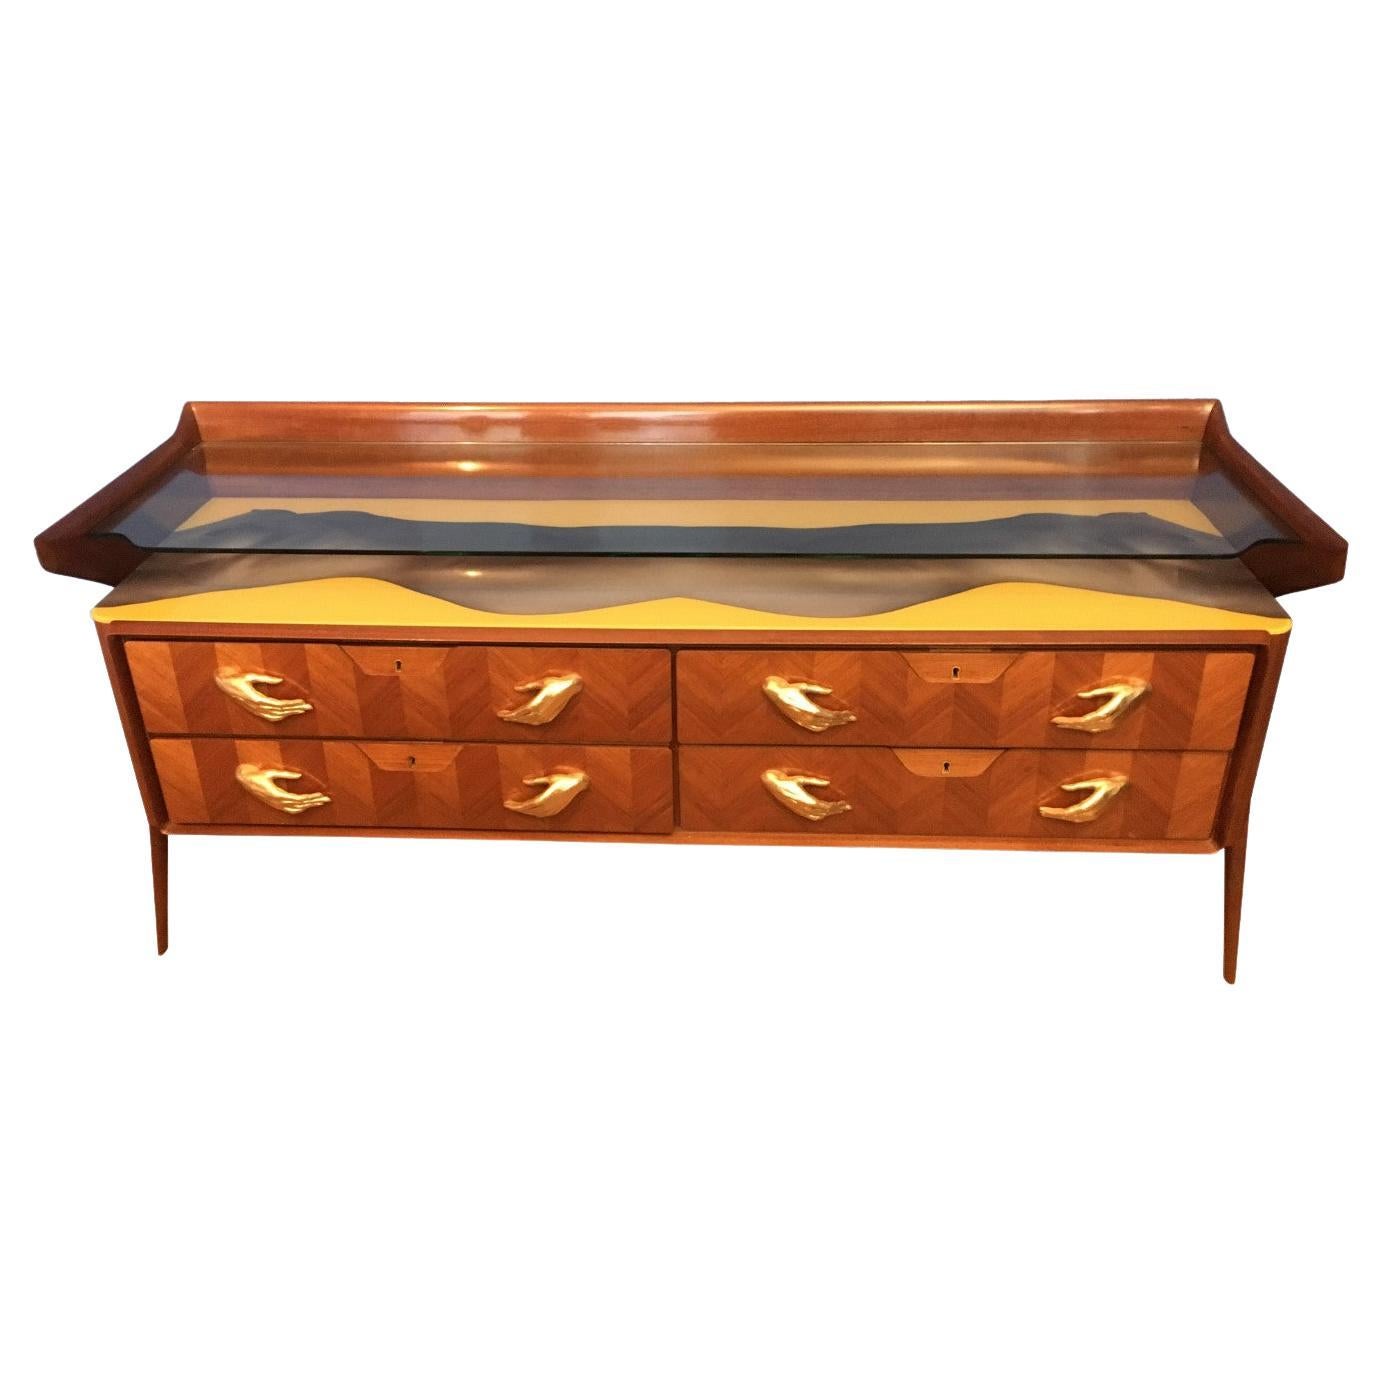 Contemporary Sideboard with Hand-Like Handles and Female Nude Graphic For Sale